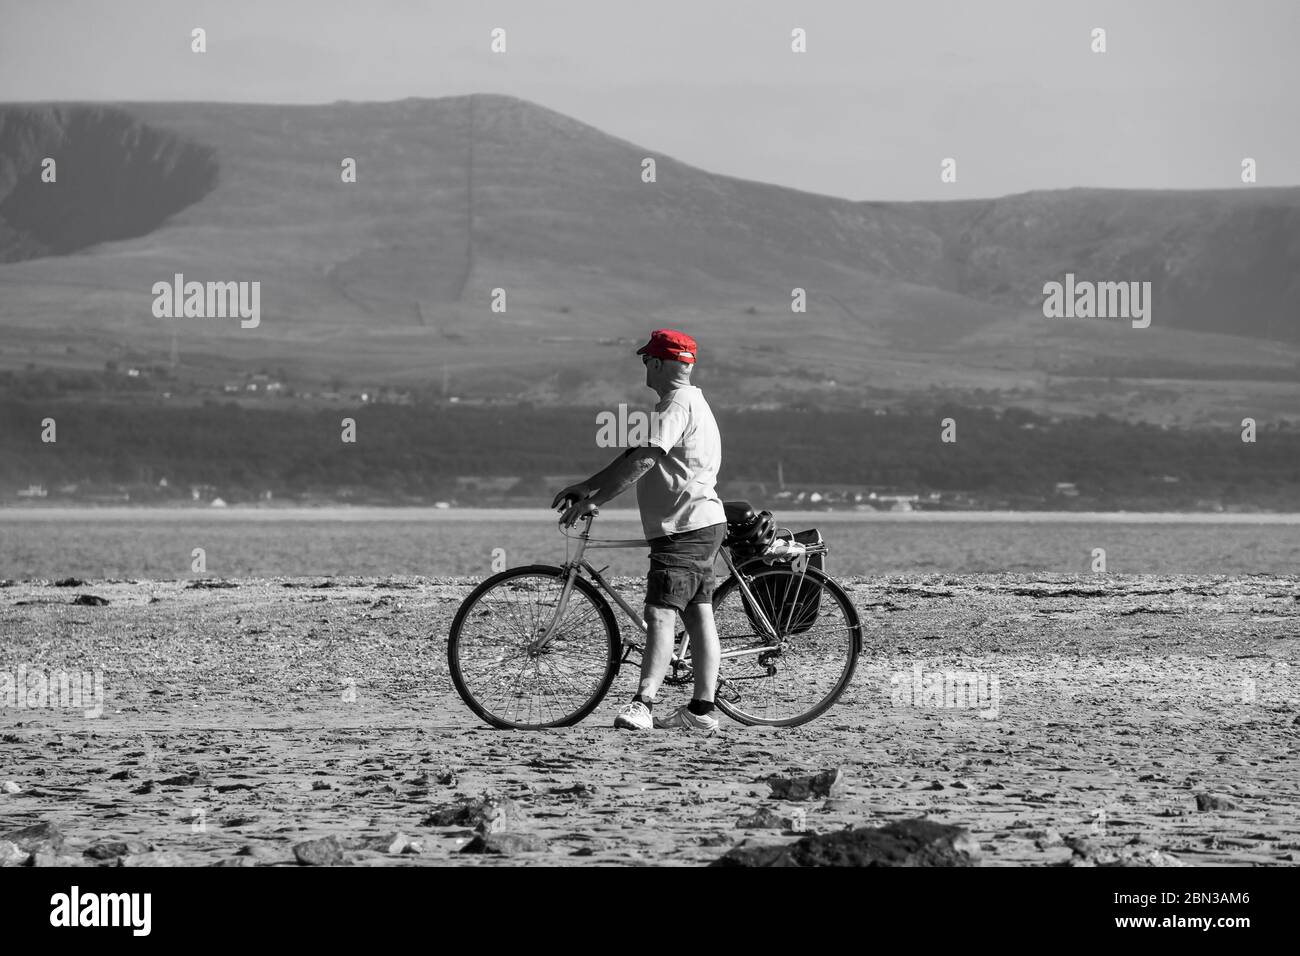 Man in red cap, British holidaymaker, isolated on empty UK beach pushing his bicycle on sand. Monochrome background. Staycation summer holiday. Stock Photo